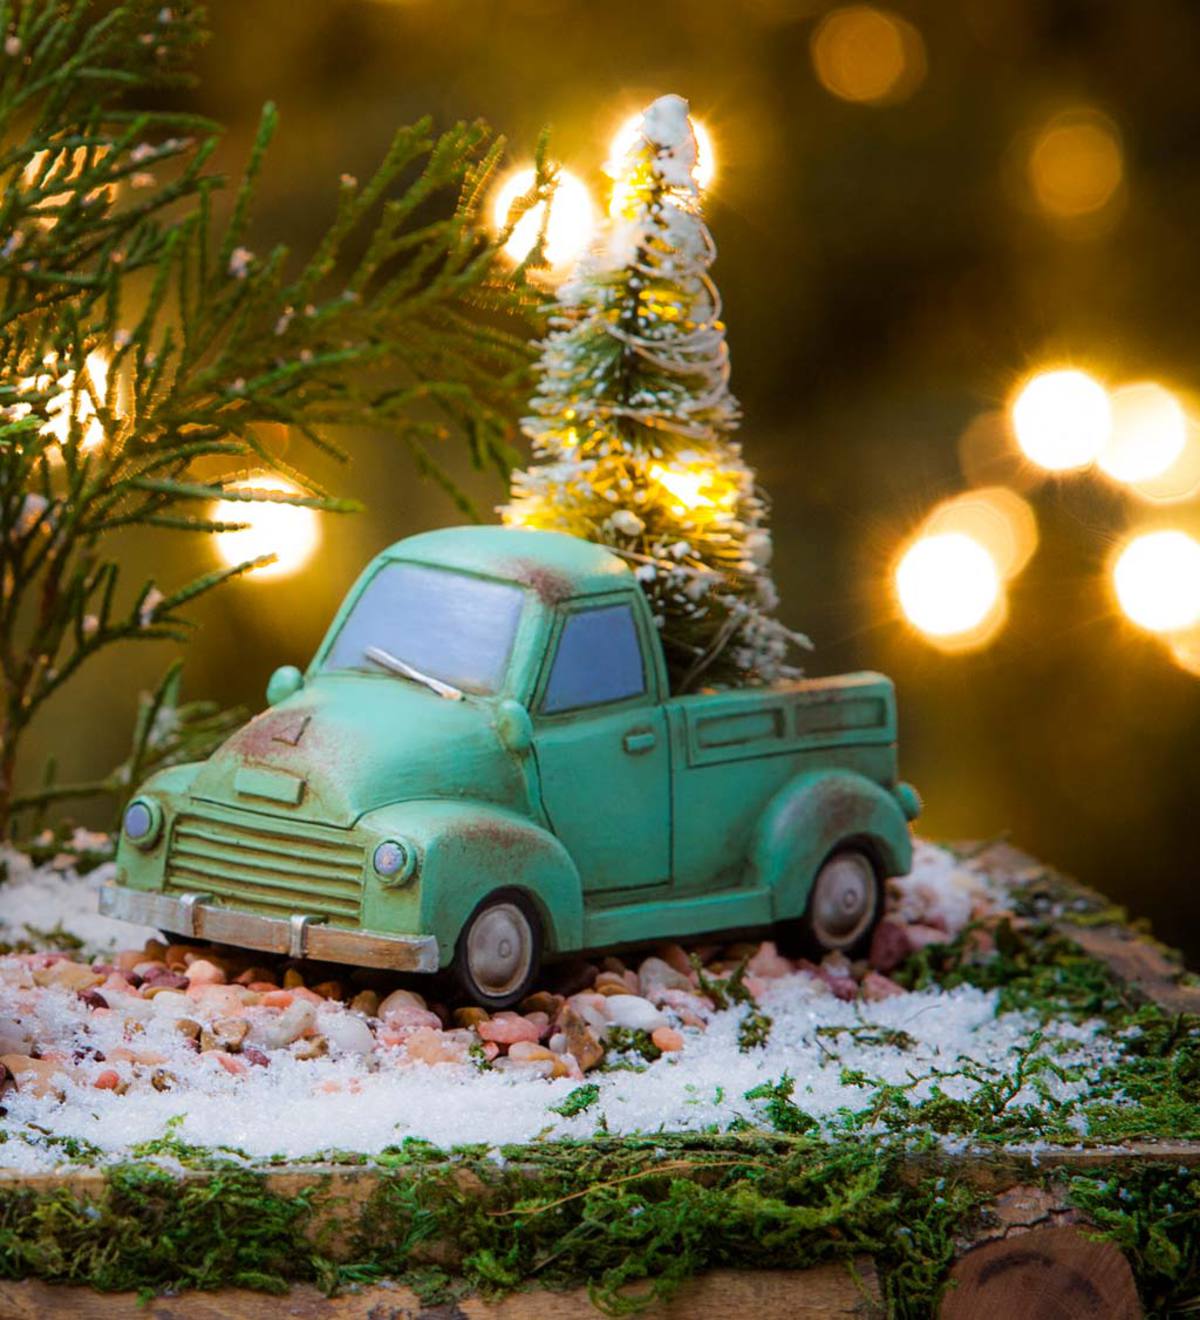 Mini Holiday Teal Truck with Lighted Tree